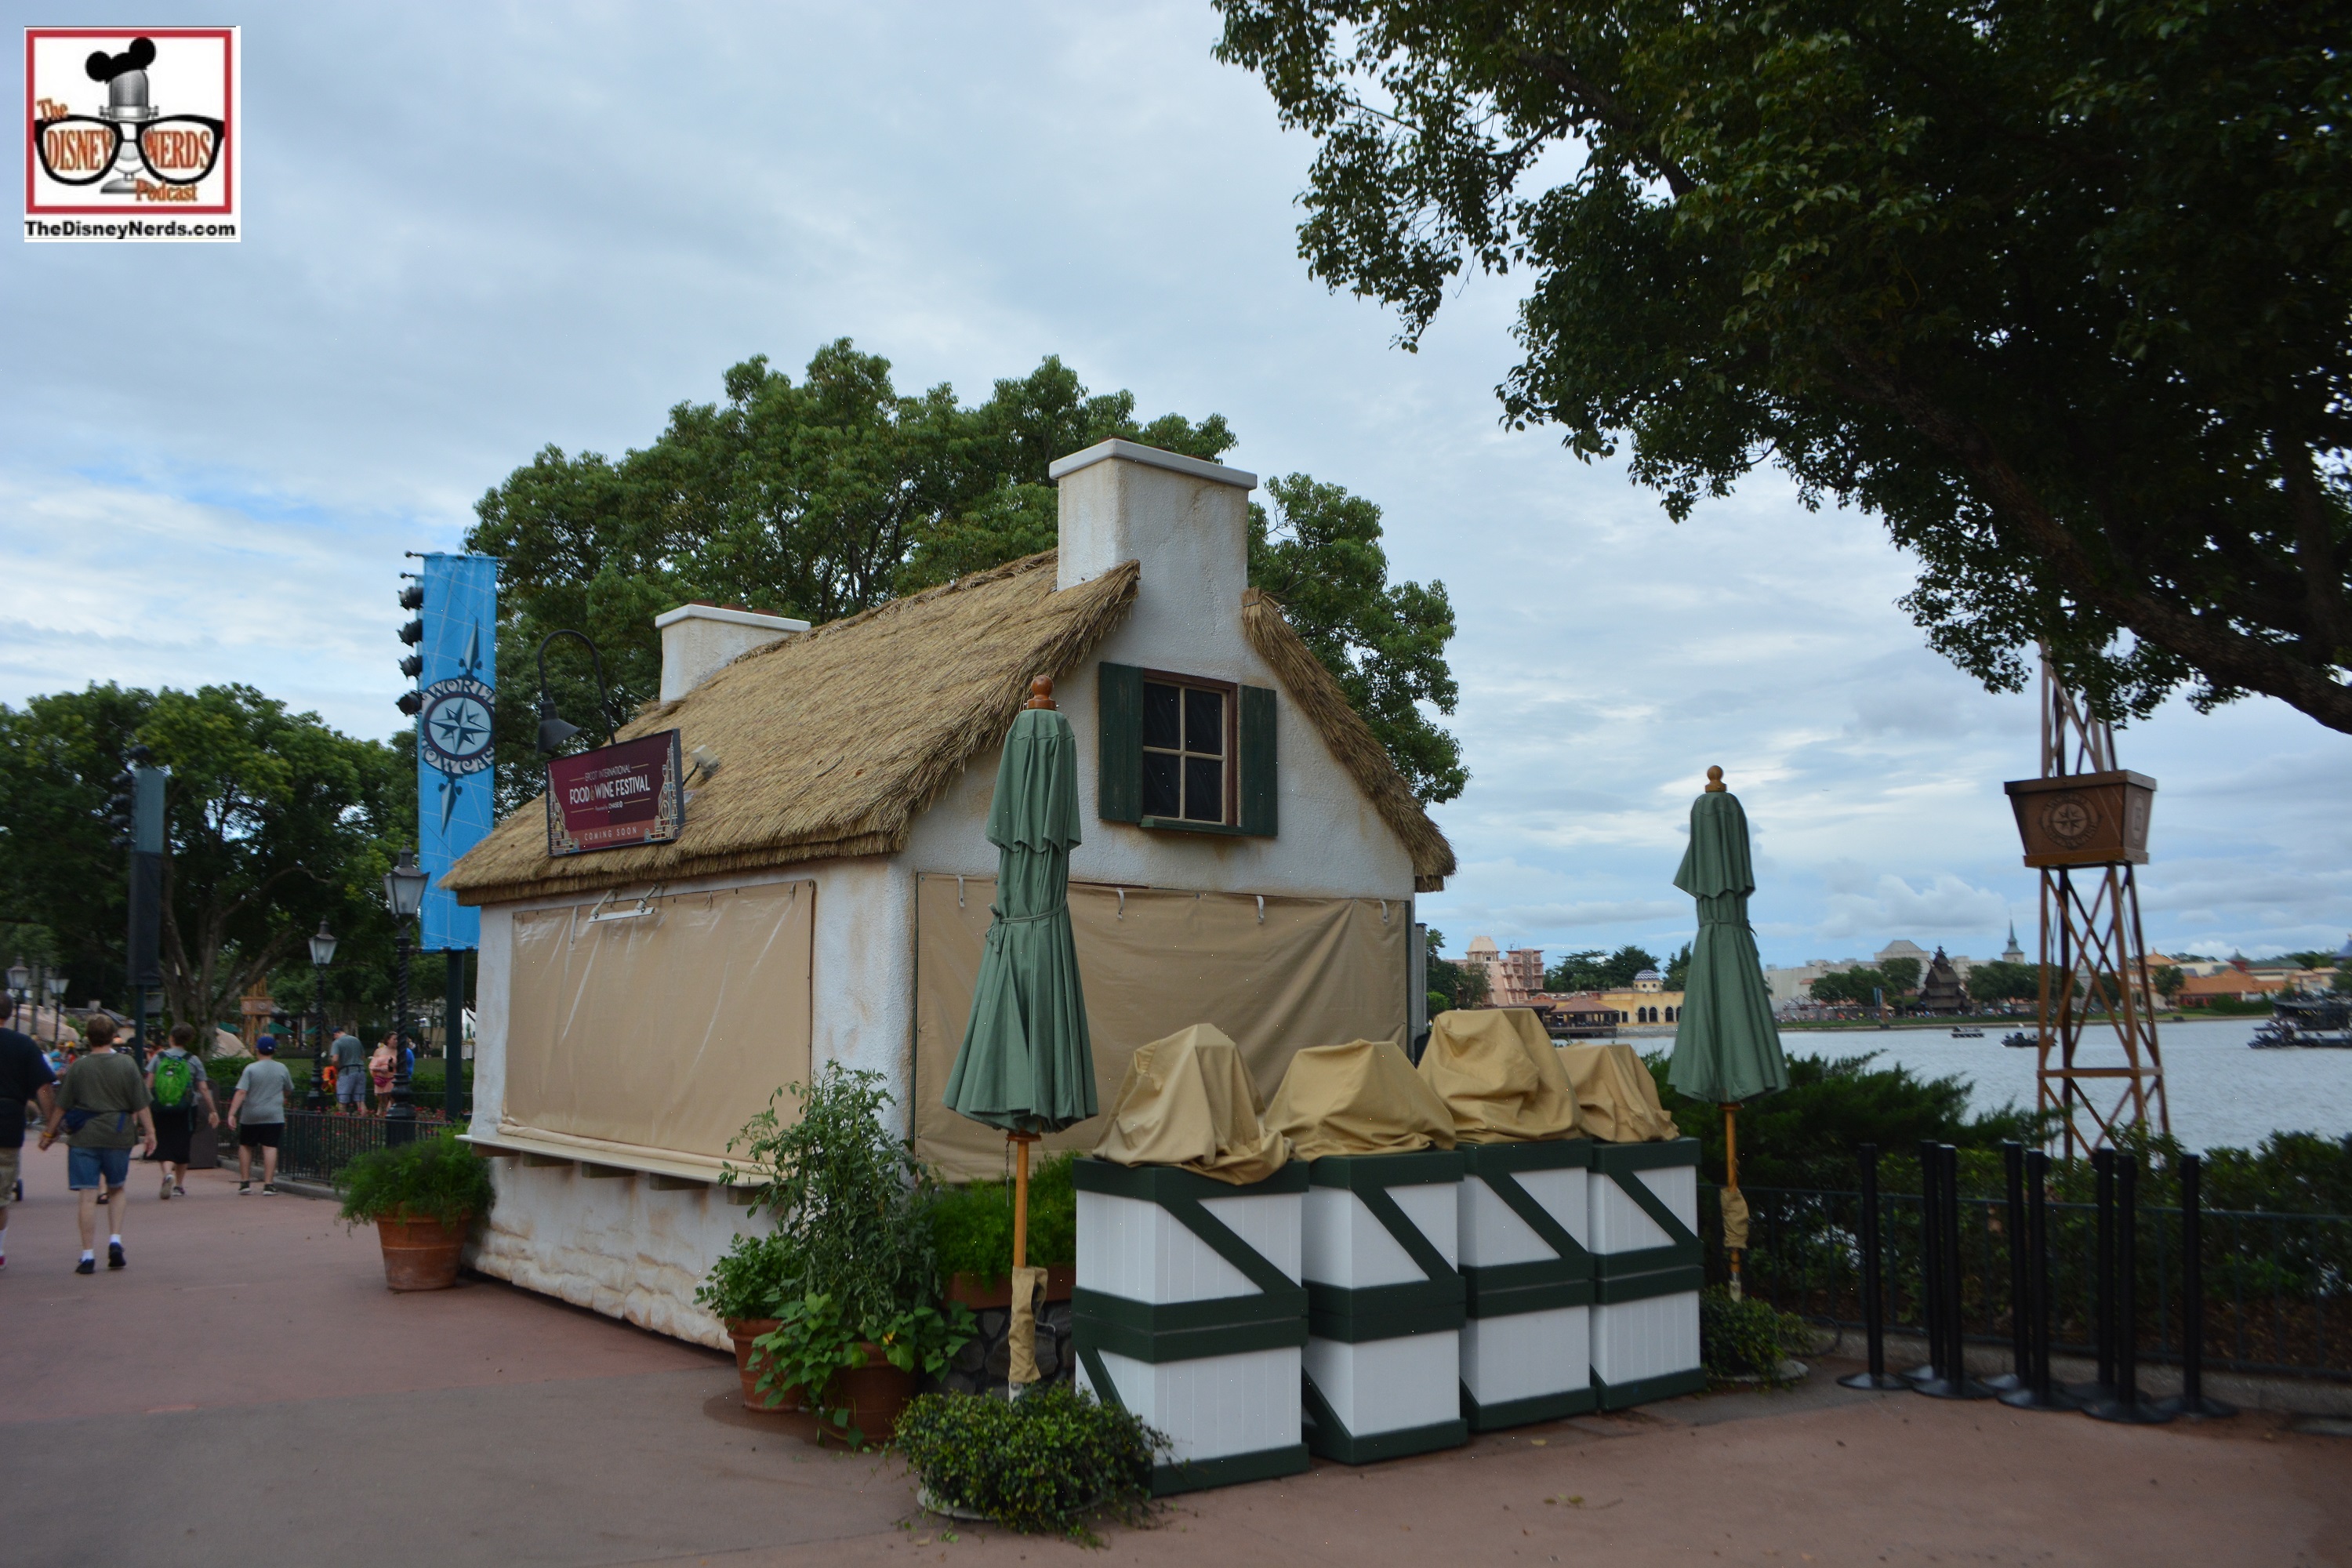 Epcot is gearing up for the food and wine festival... feels so empty with no booth open..